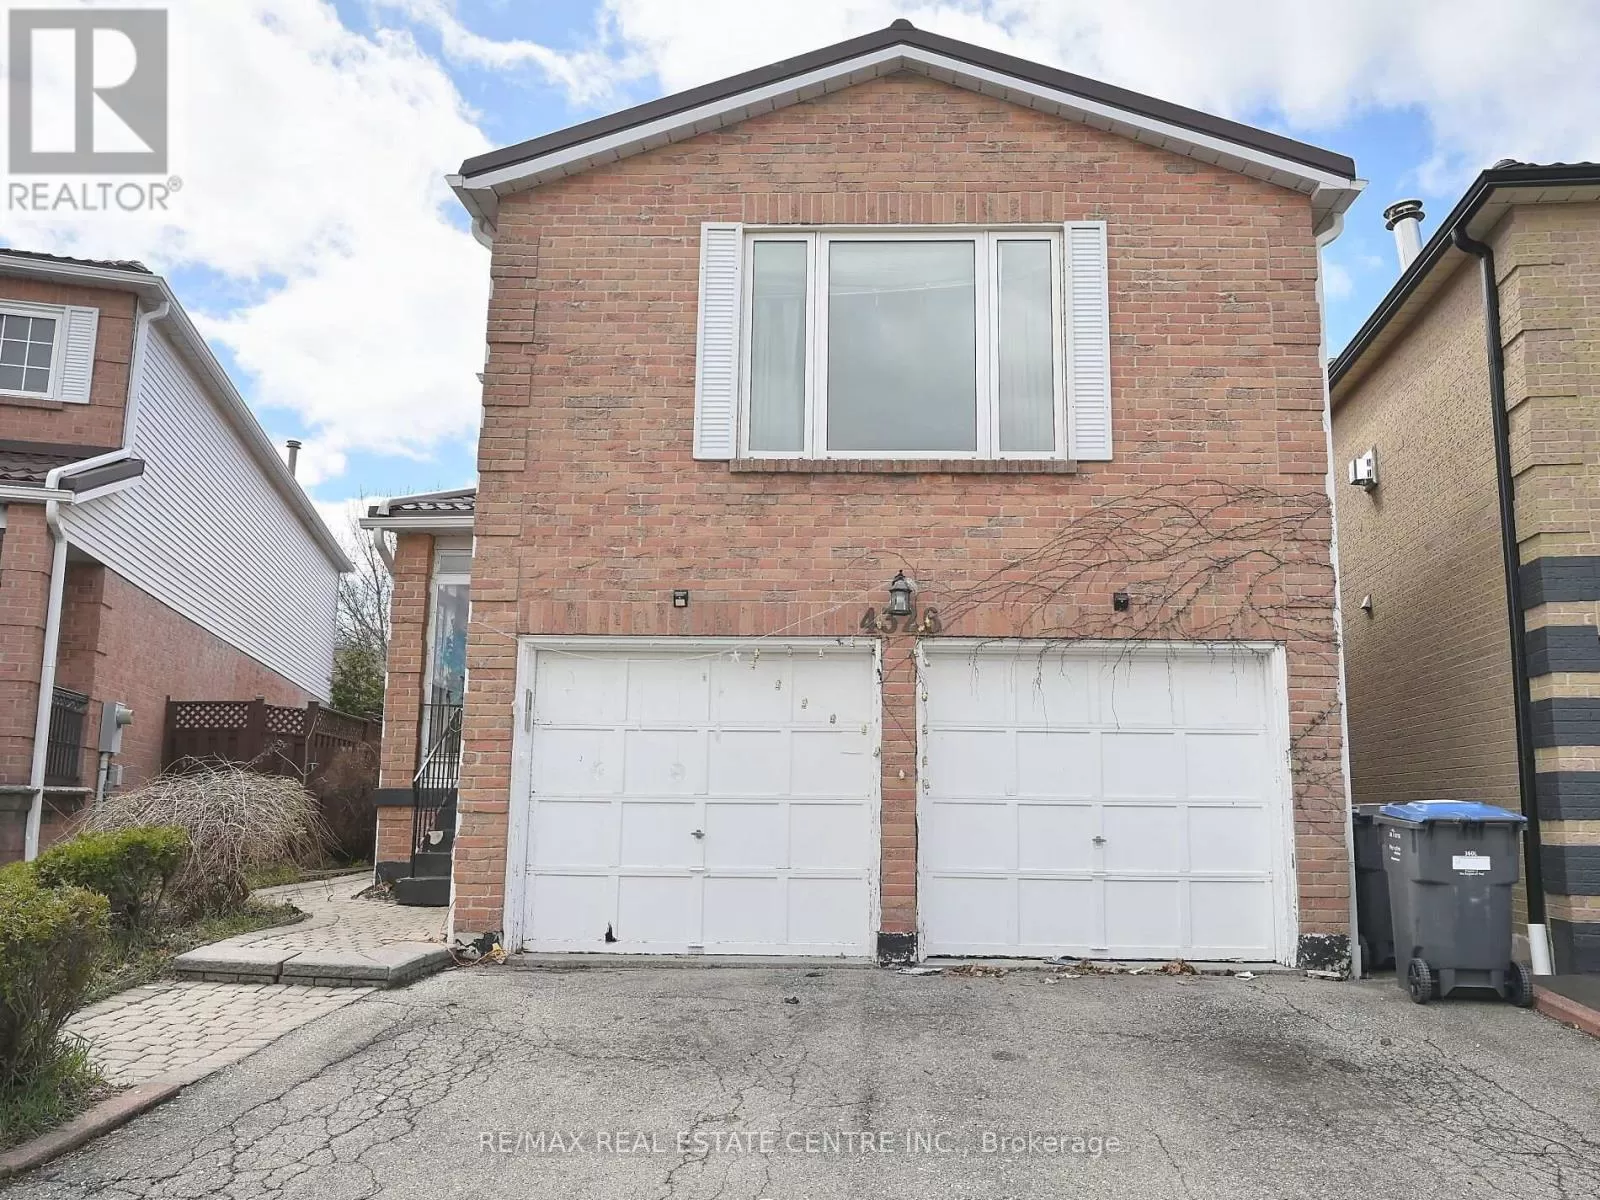 House for rent: 4326 Waterford Cres, Mississauga, Ontario L5R 2B2